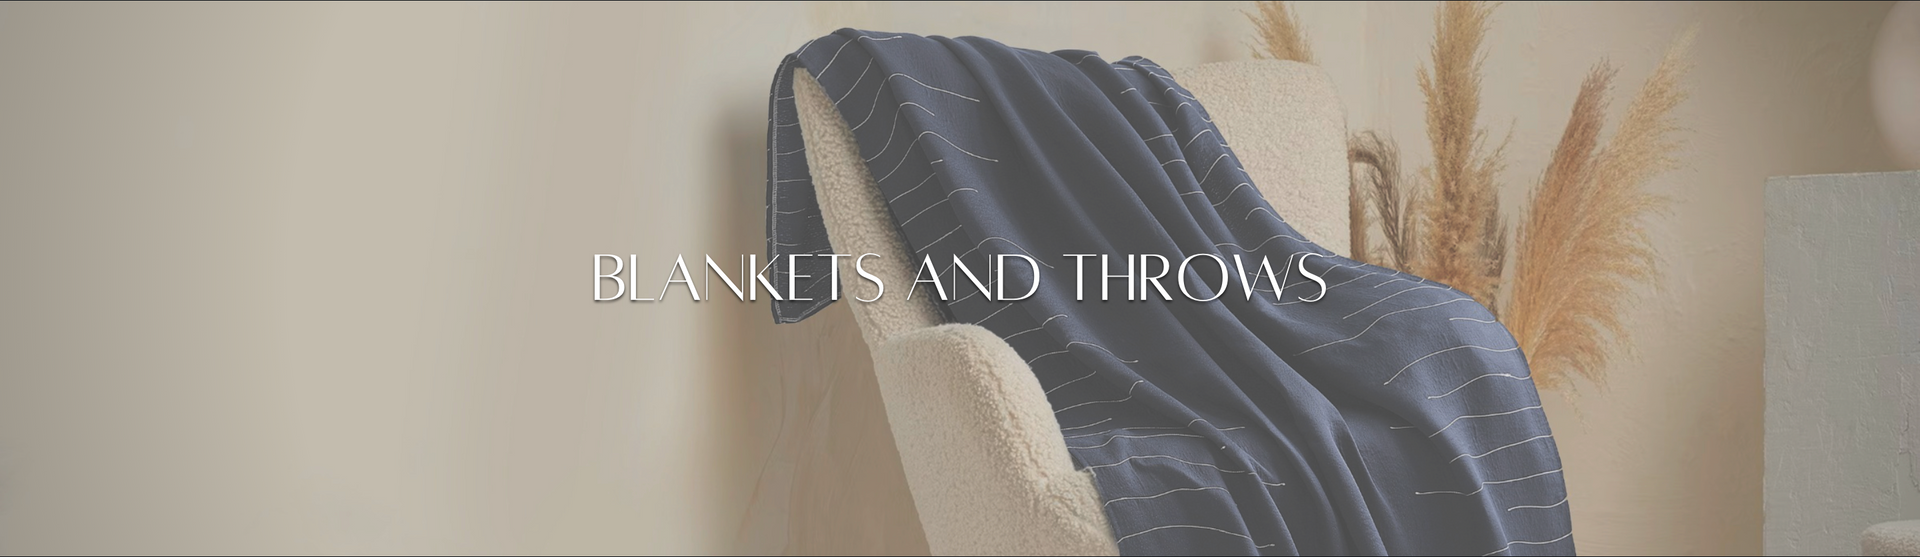 Blankets and Throws - Throws